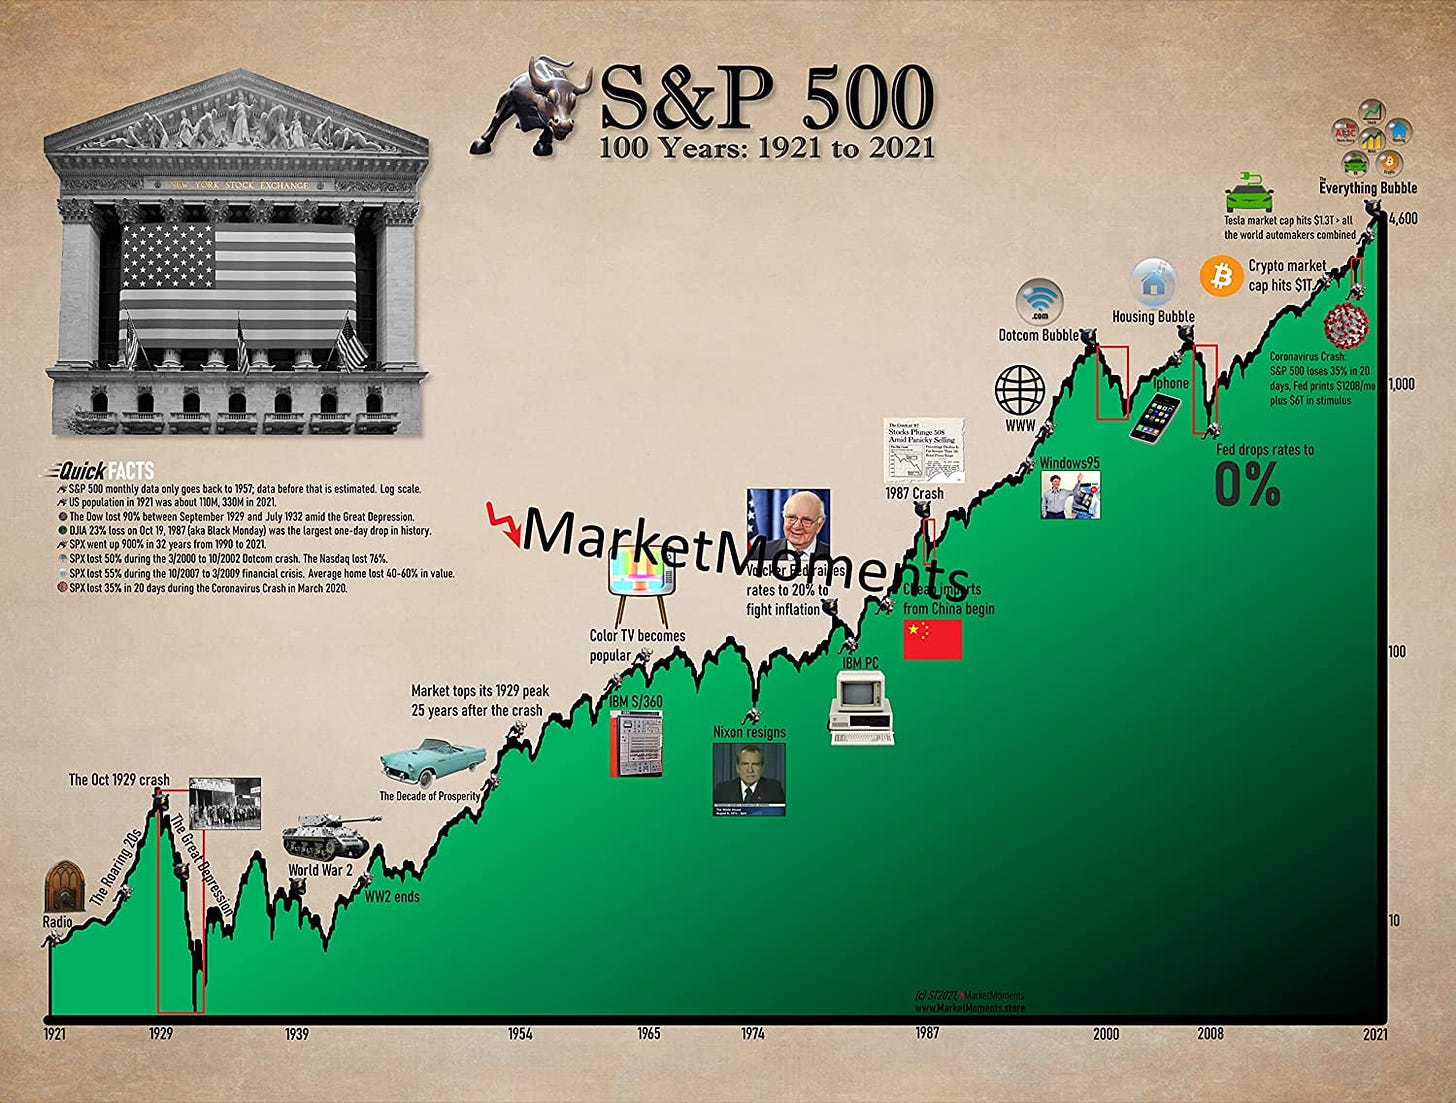 S&P 500 historical chart